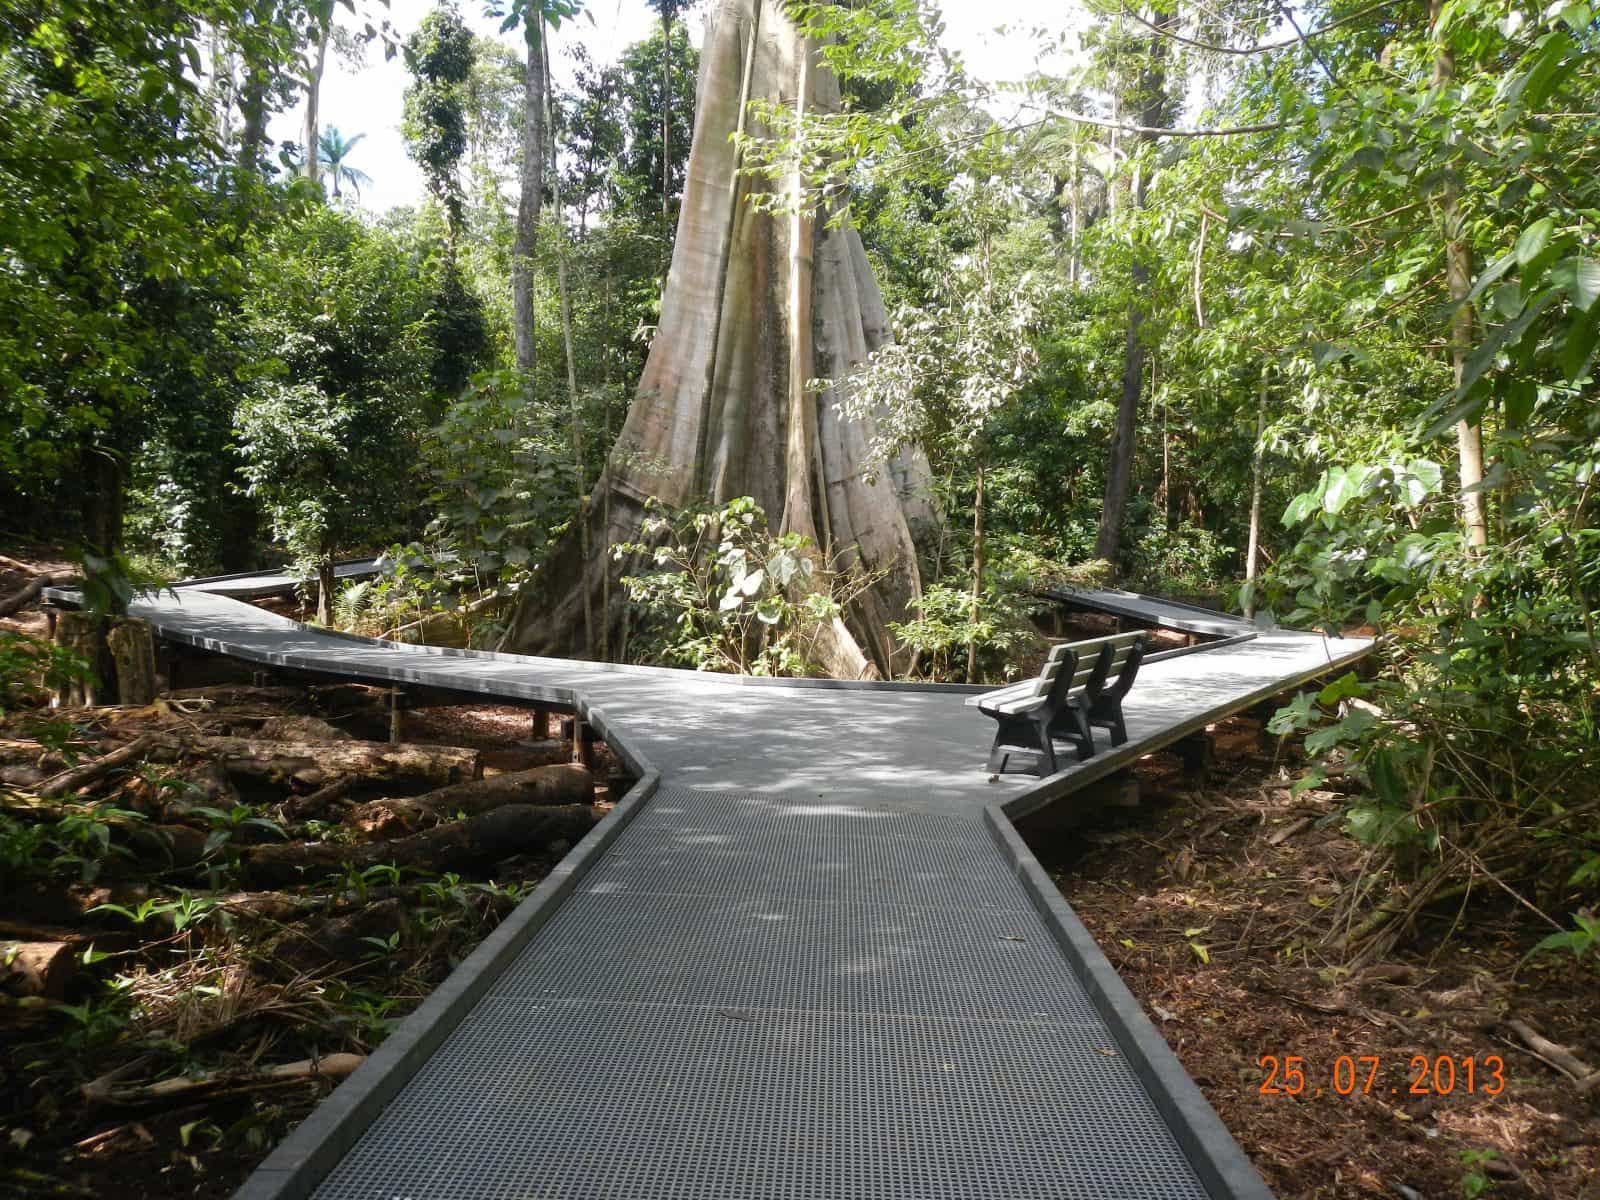 Boardwalk leads towards and encircles broad base of large fig tree, surrounded by forest.